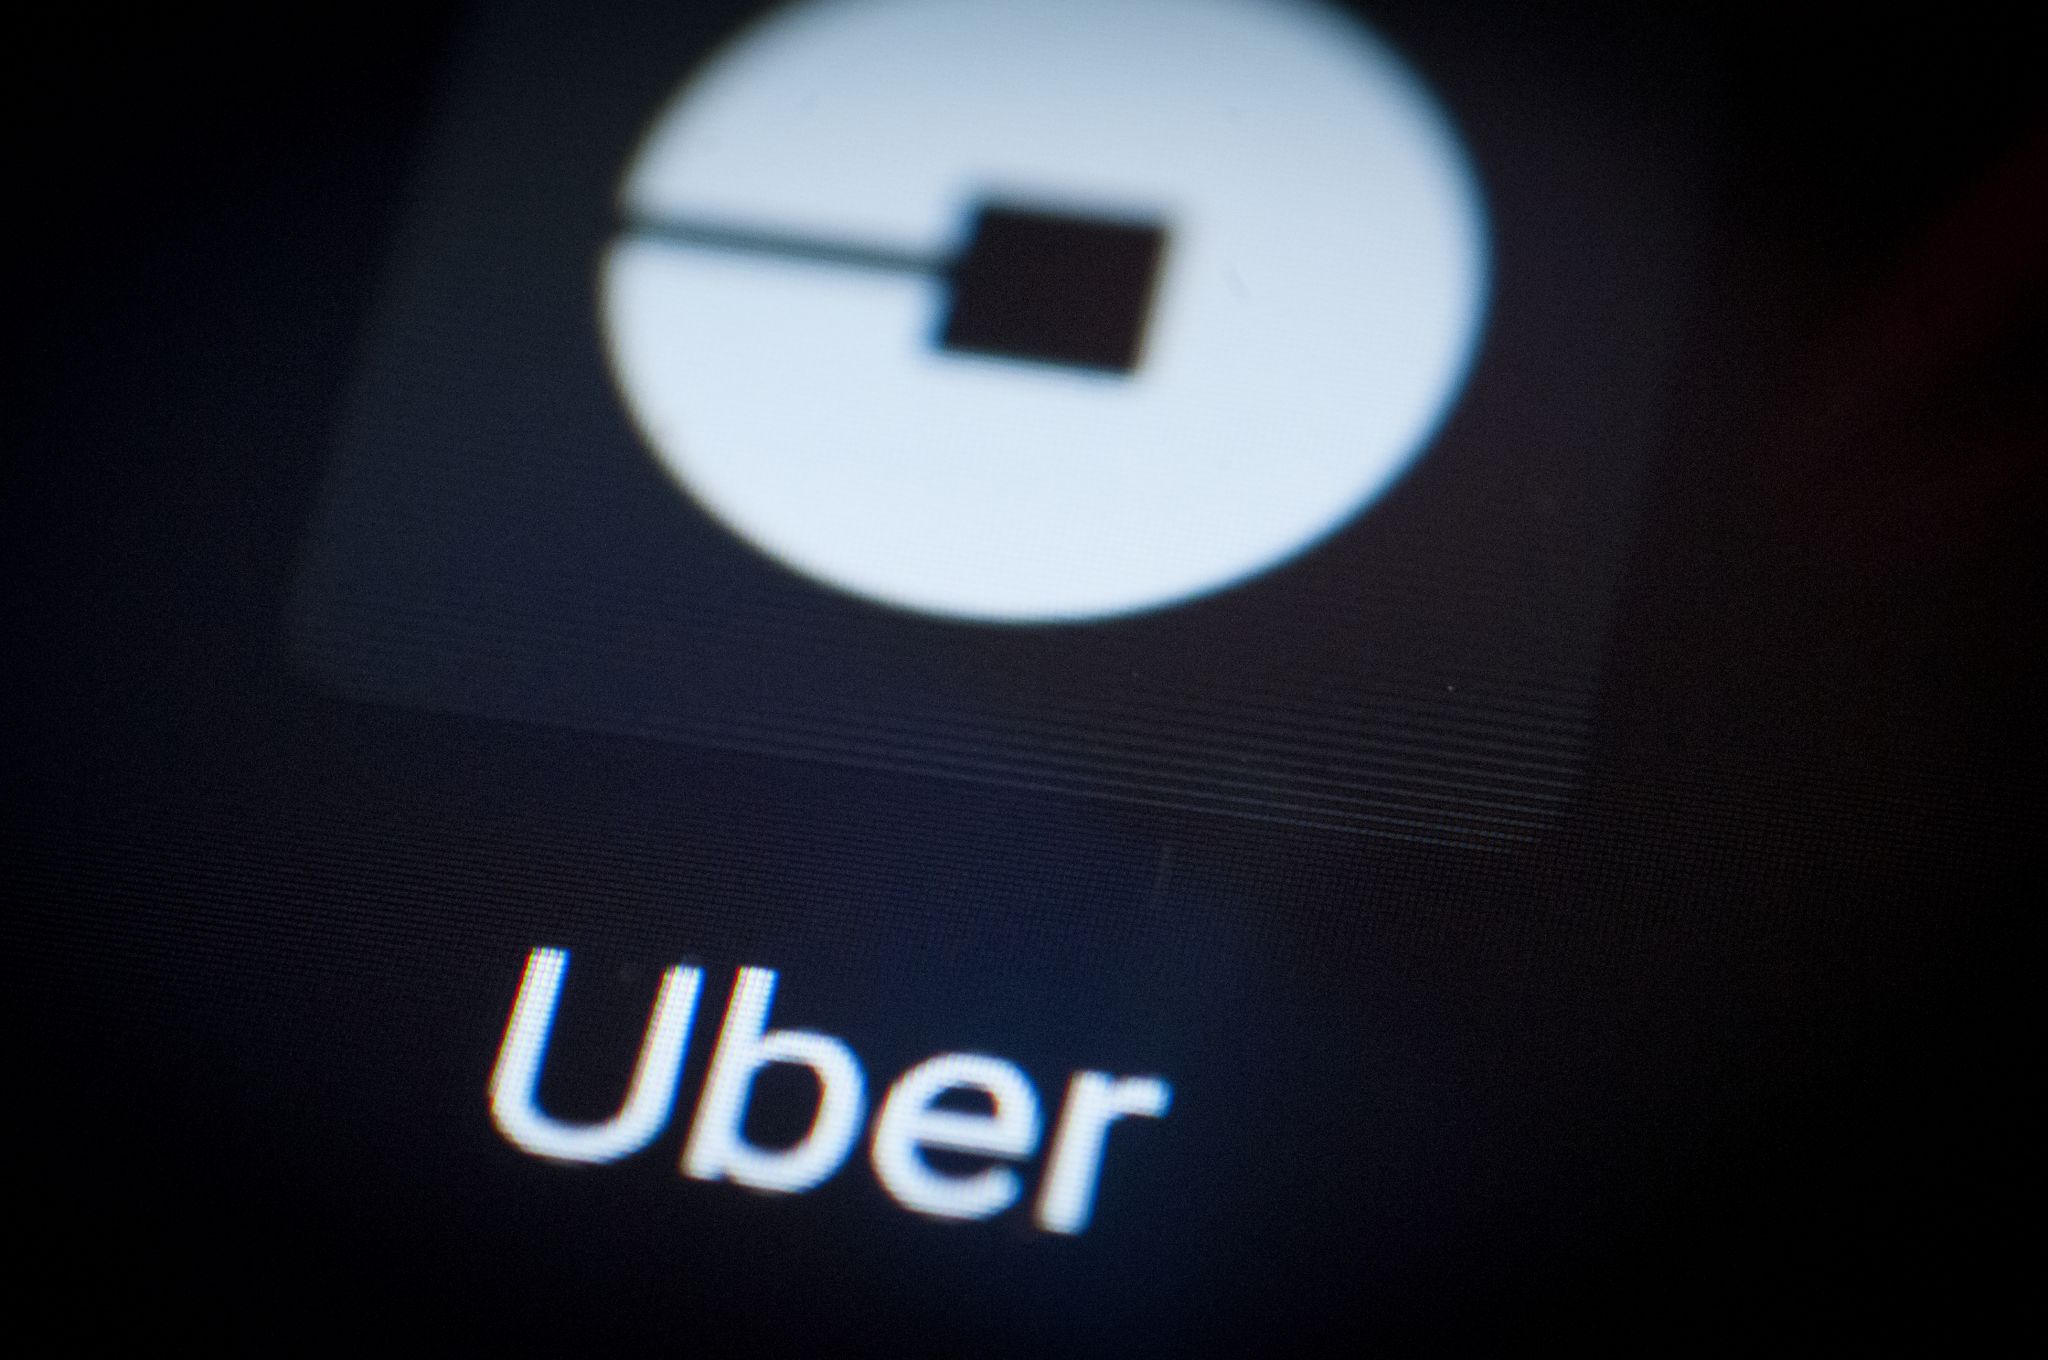 Uber will add temporary surcharges for rides and food deliveries due to the higher cost of gas